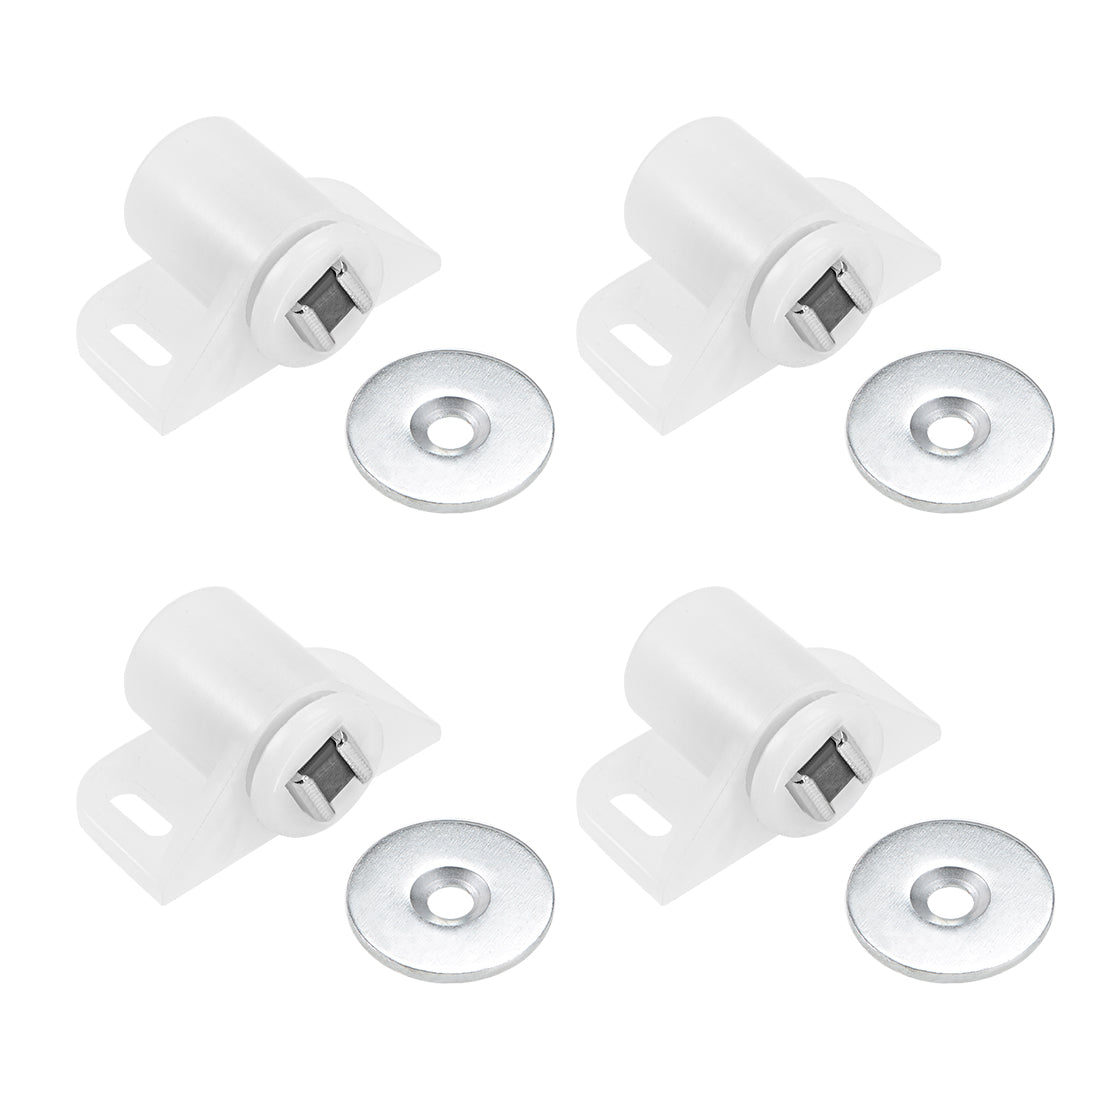 uxcell Uxcell Magnetic Latches Catch, Cabinet Door Magnet Latch for Cupboard Closet White 4pcs